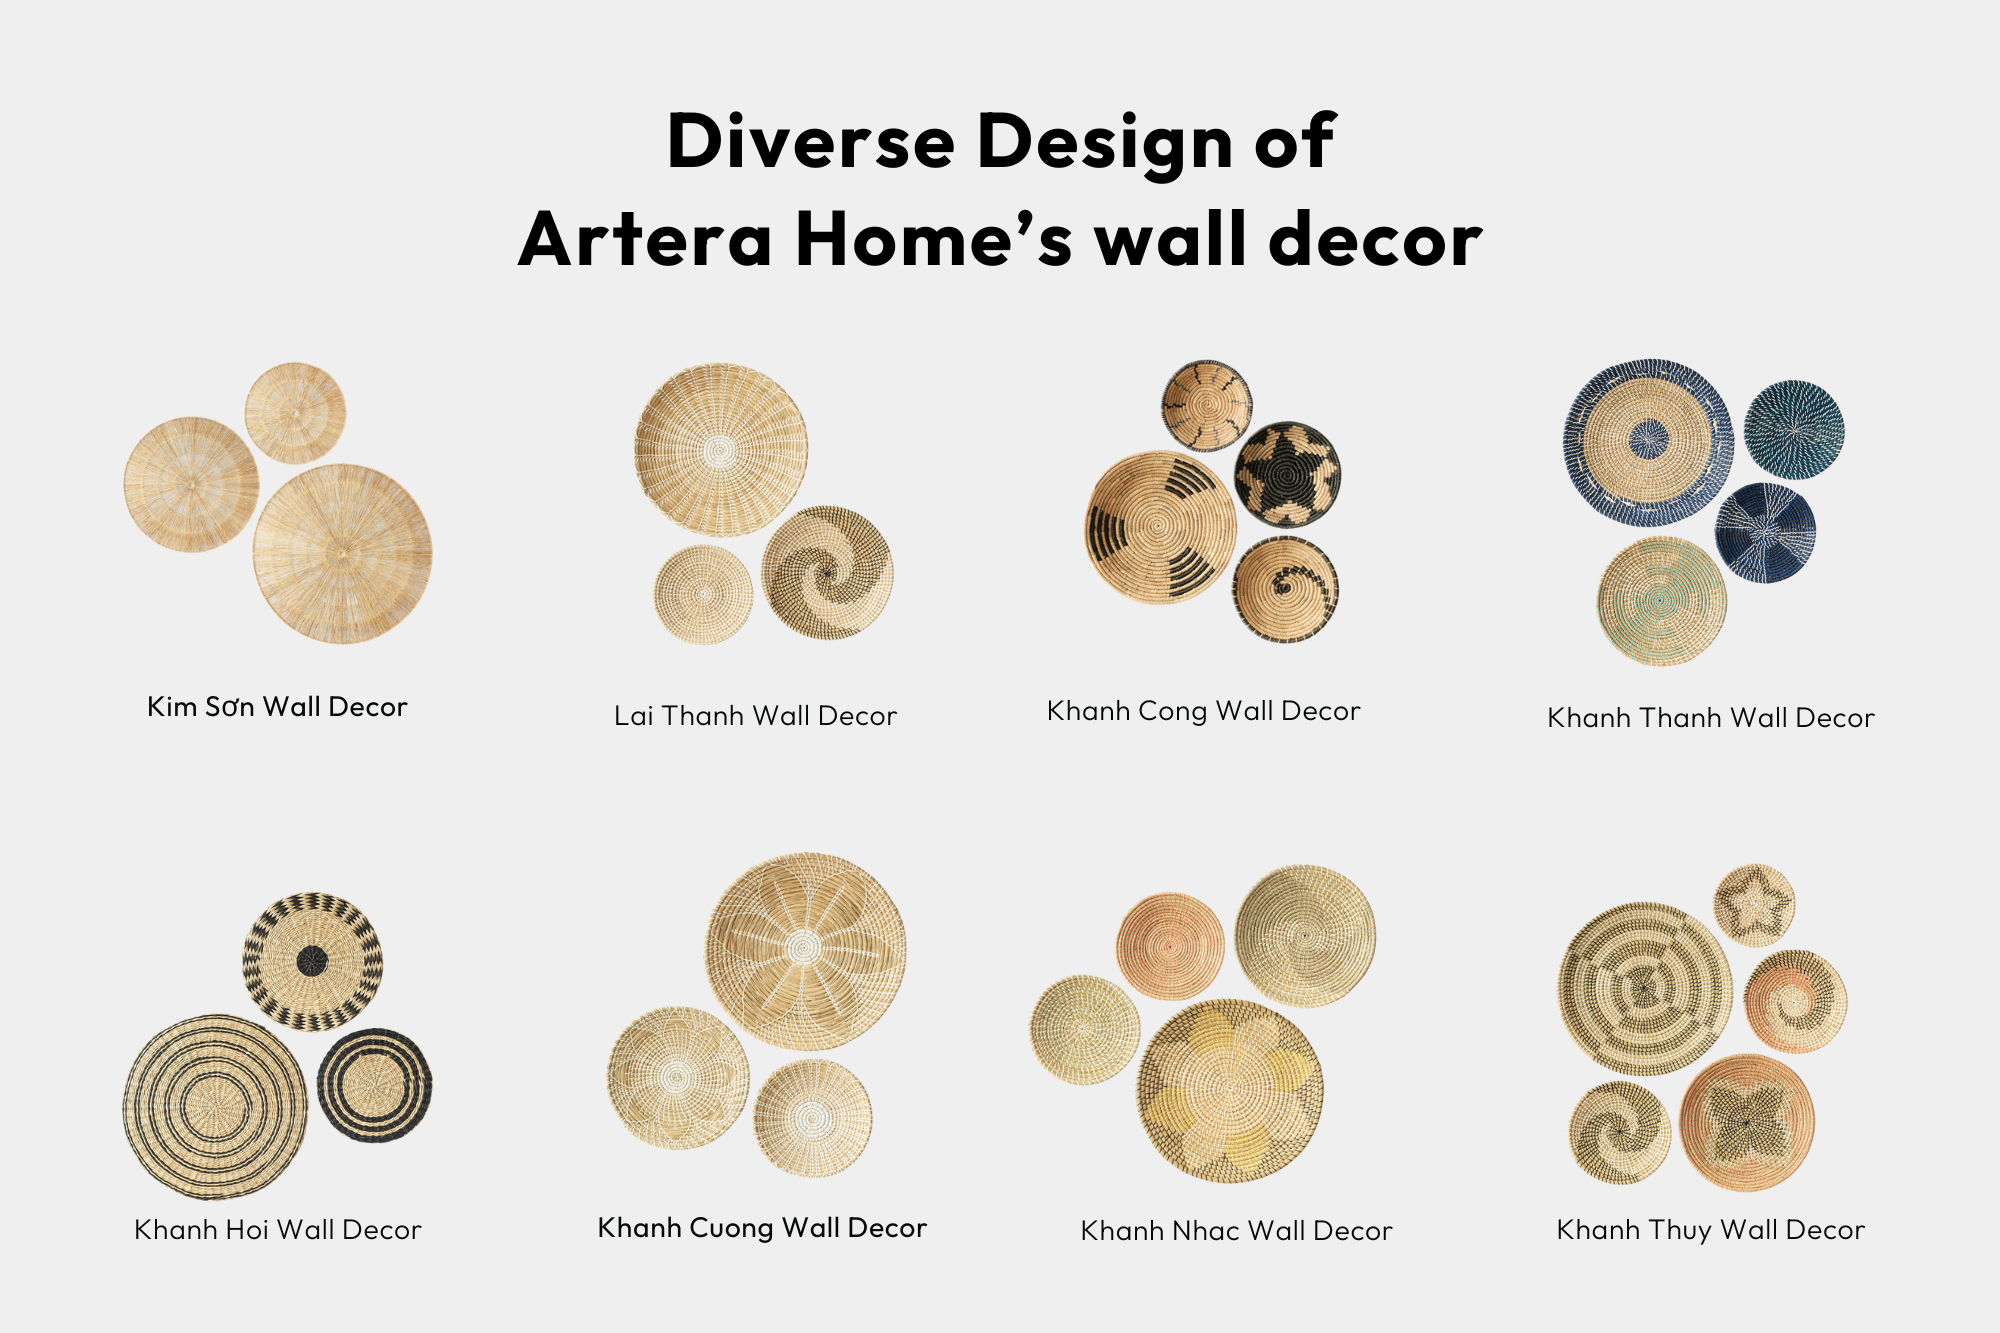 Wholesale wall decor from Artera Home